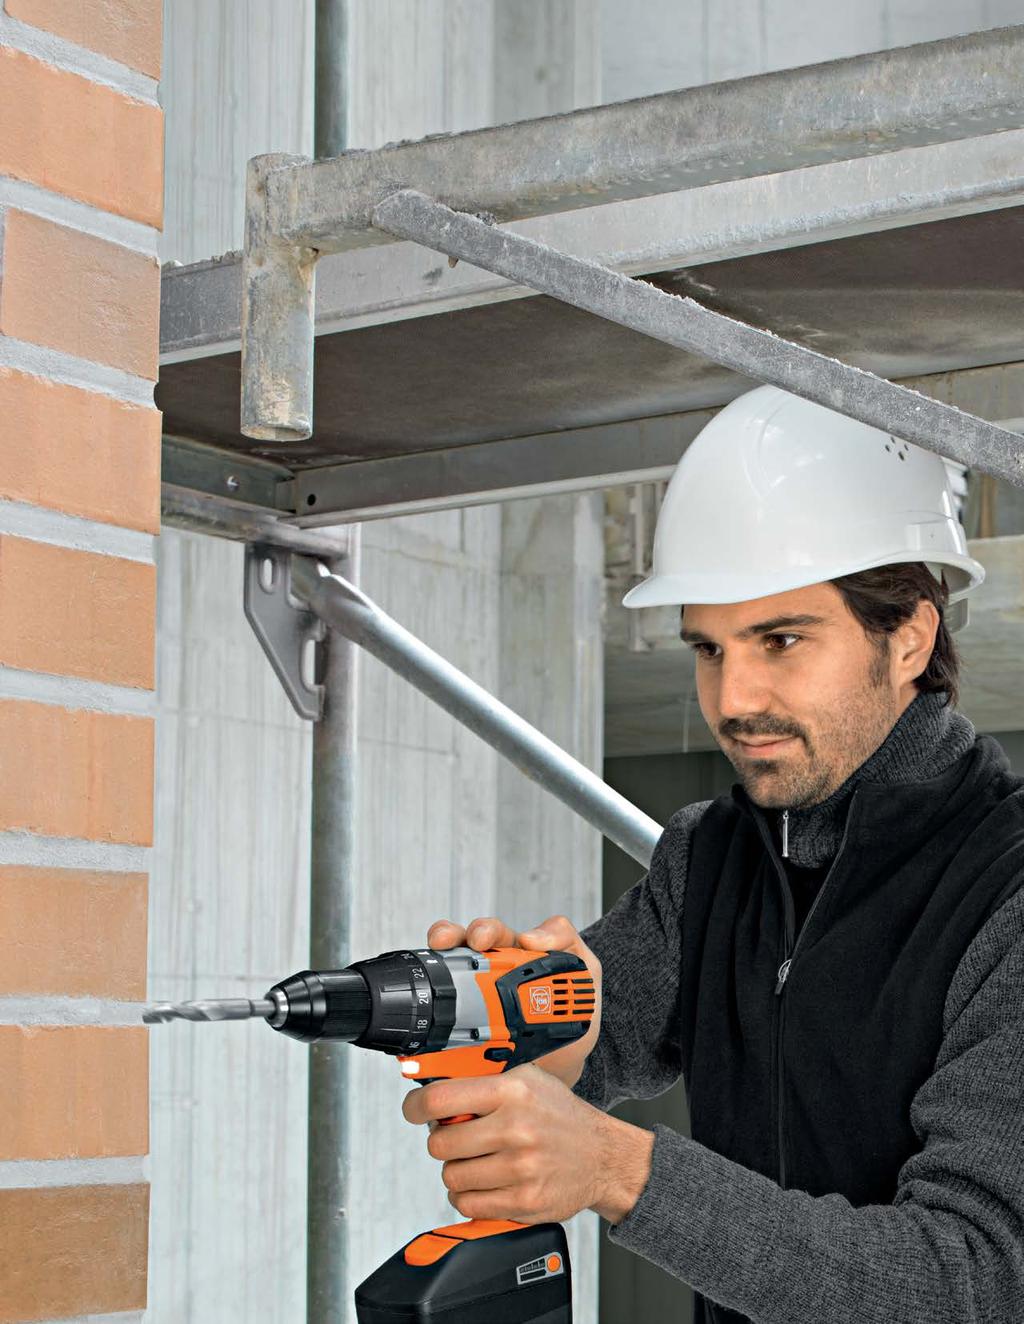 FEIN 2-speed cordless (hammer) drill/driver compact and extremely durable.